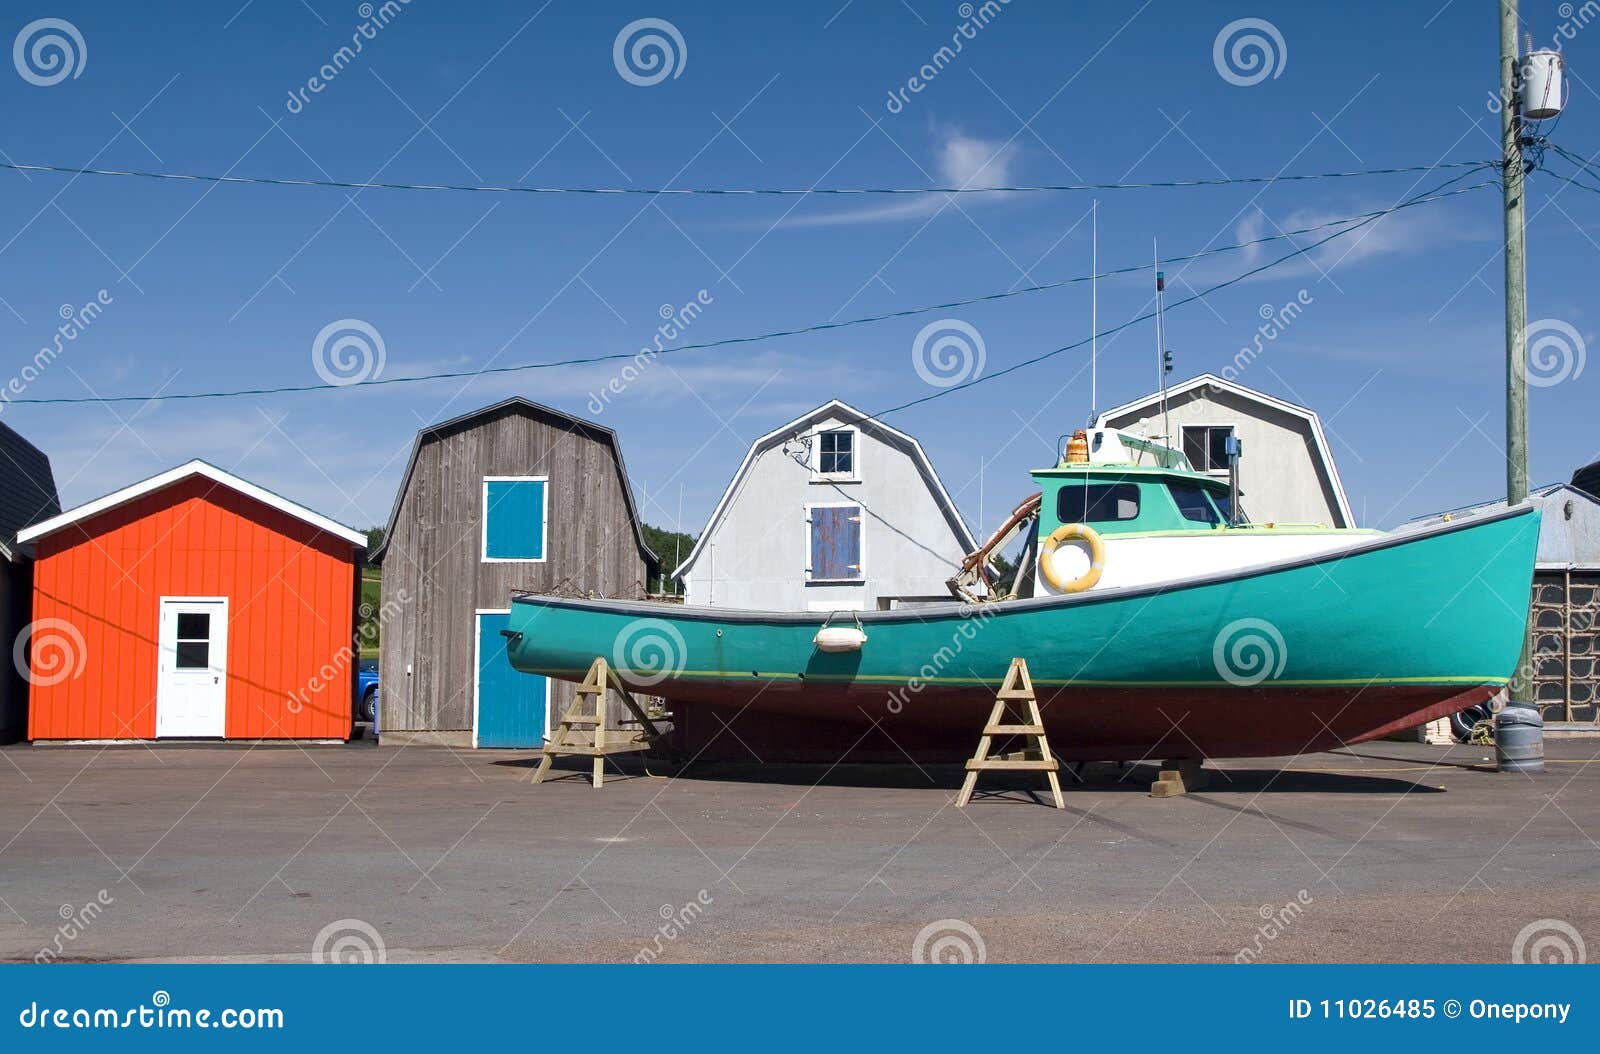 Commercial lobster boat outside colorful bait sheds prior to launching 